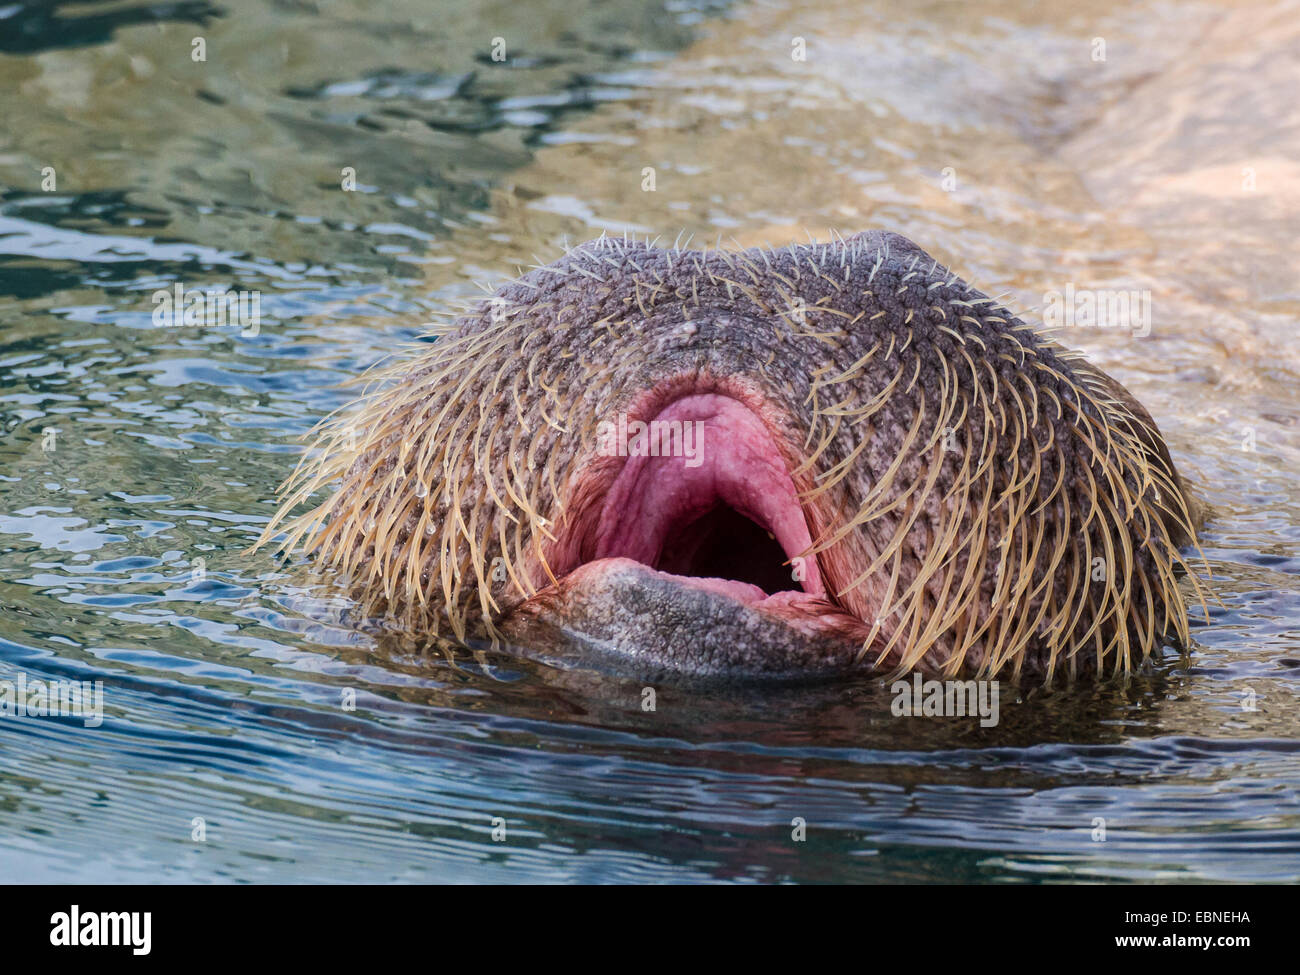 walrus (Odobenus rosmarus), open mouth on the surface of the water Stock Photo